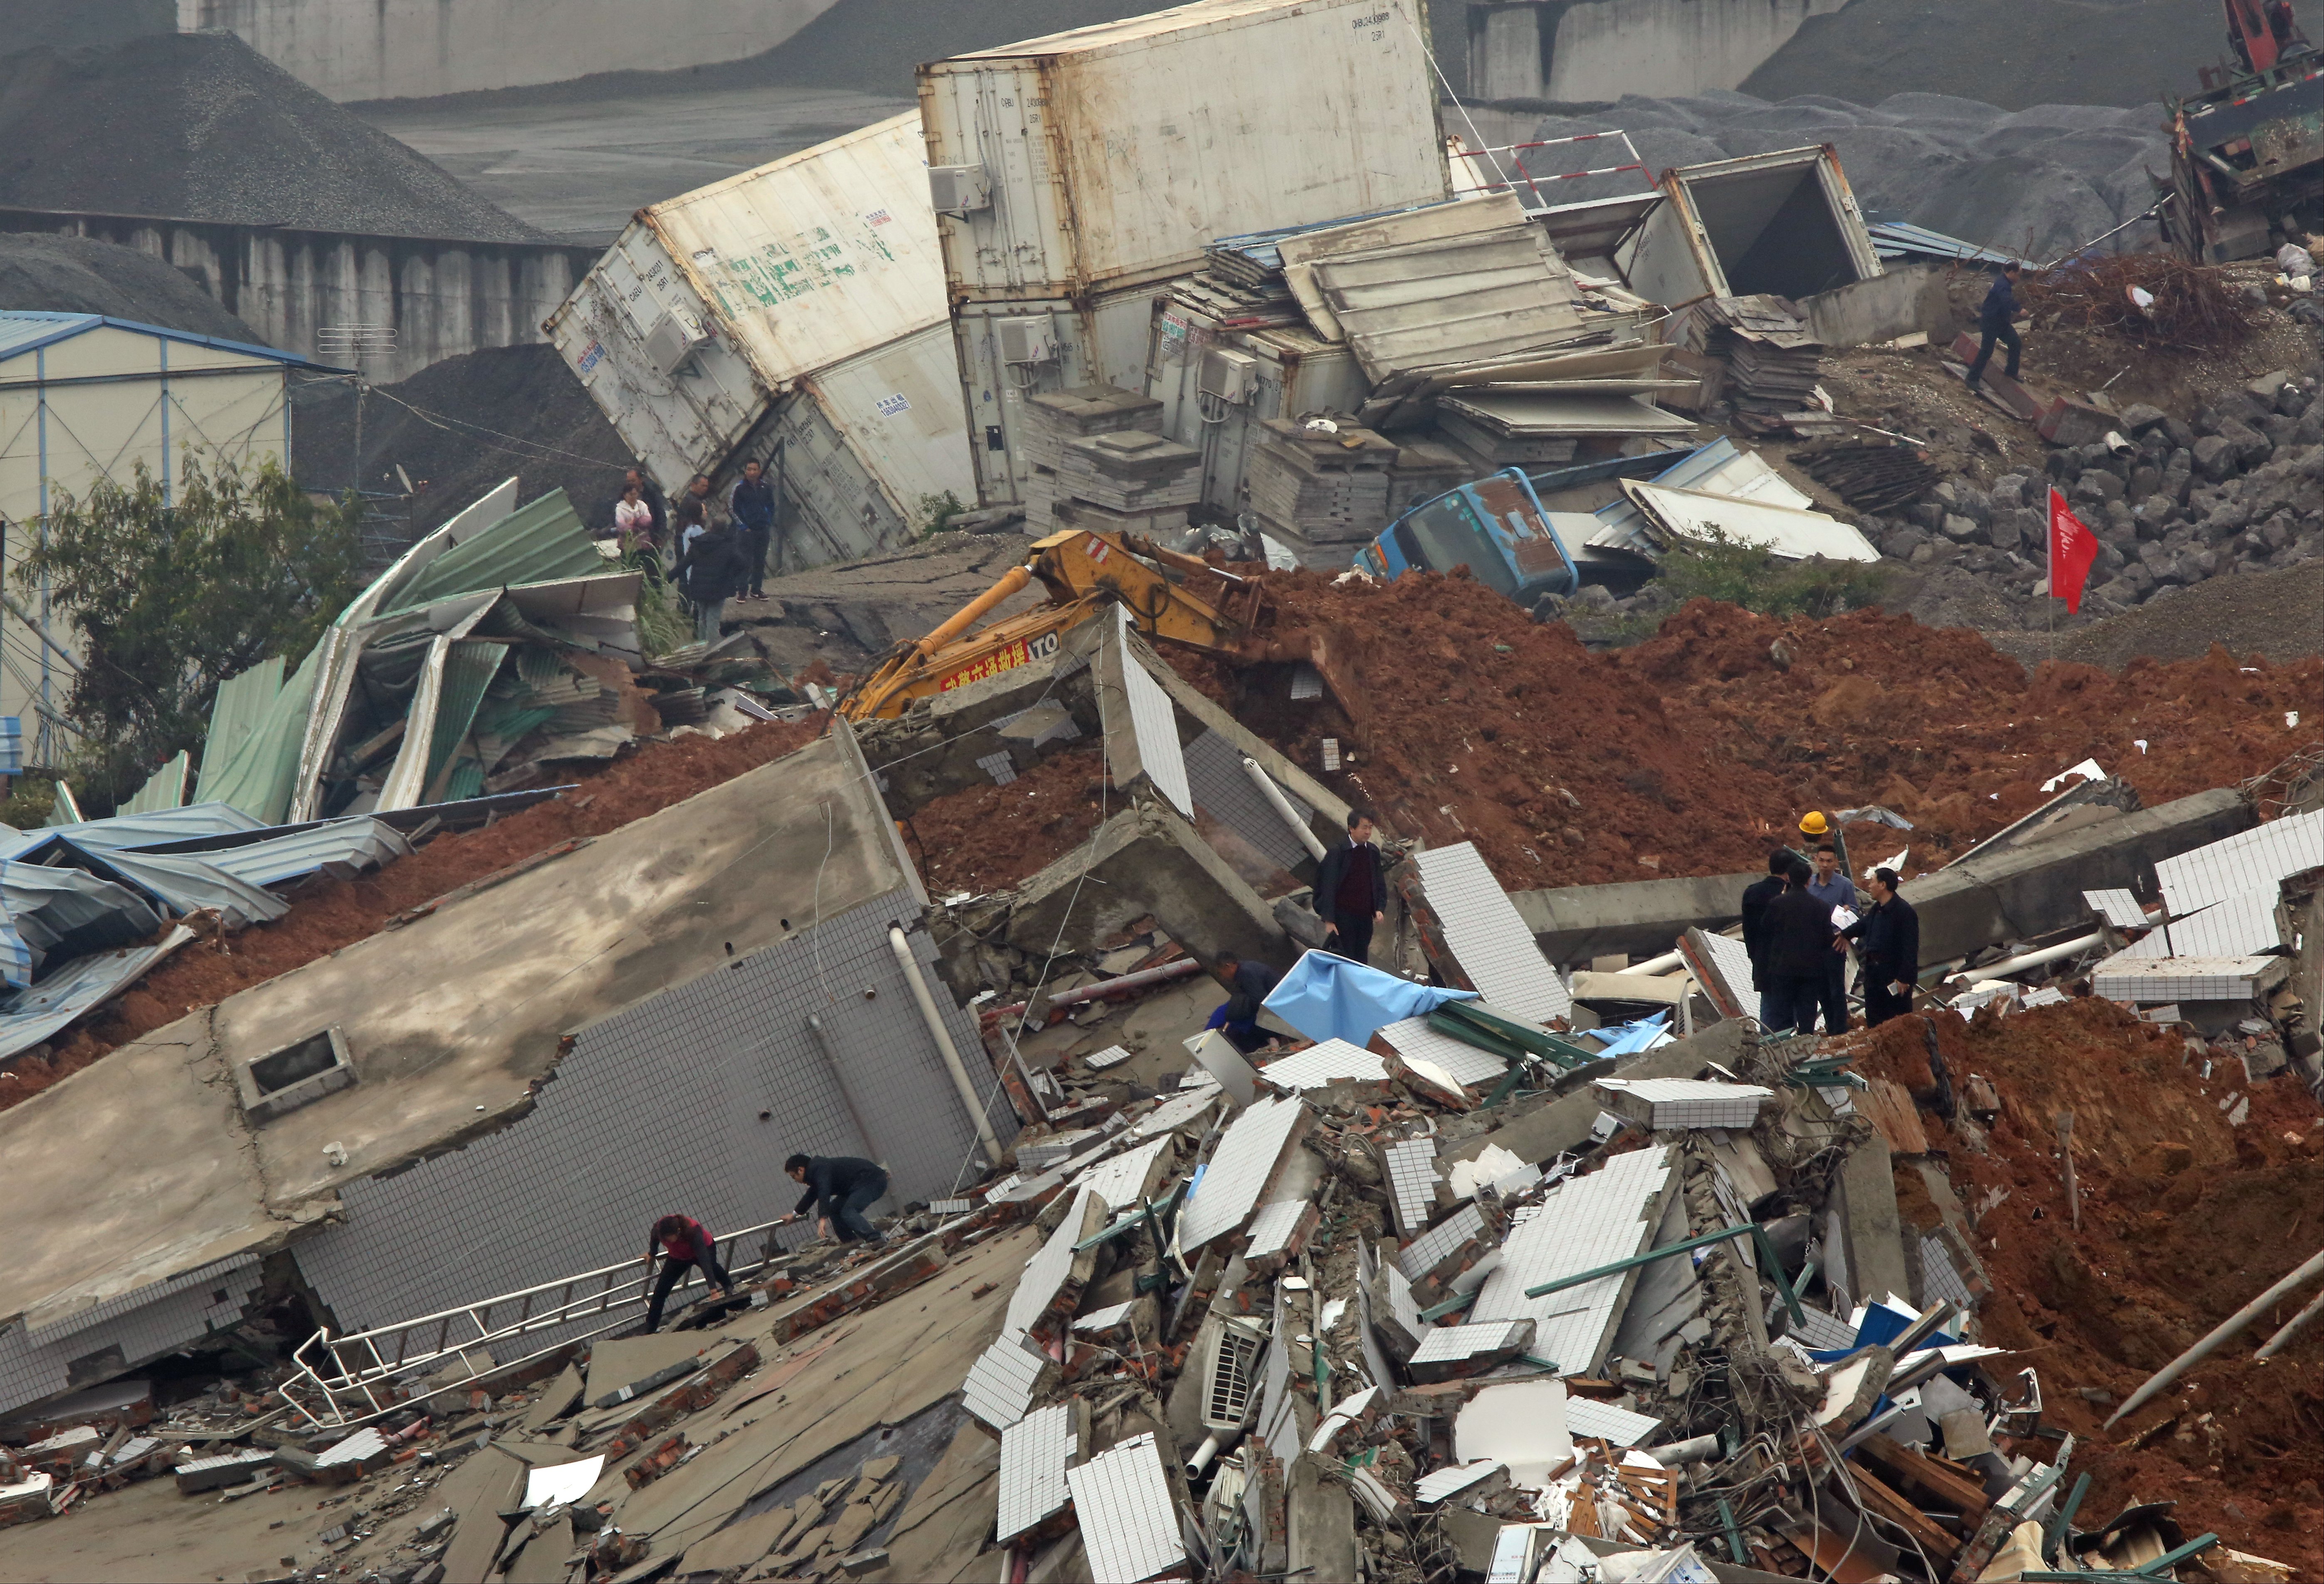 Collapsed buildings are seen at the landslide site at Hengtaiyu industrial park in Shenzhen. 21DEC15 SCMP/Edward Wong